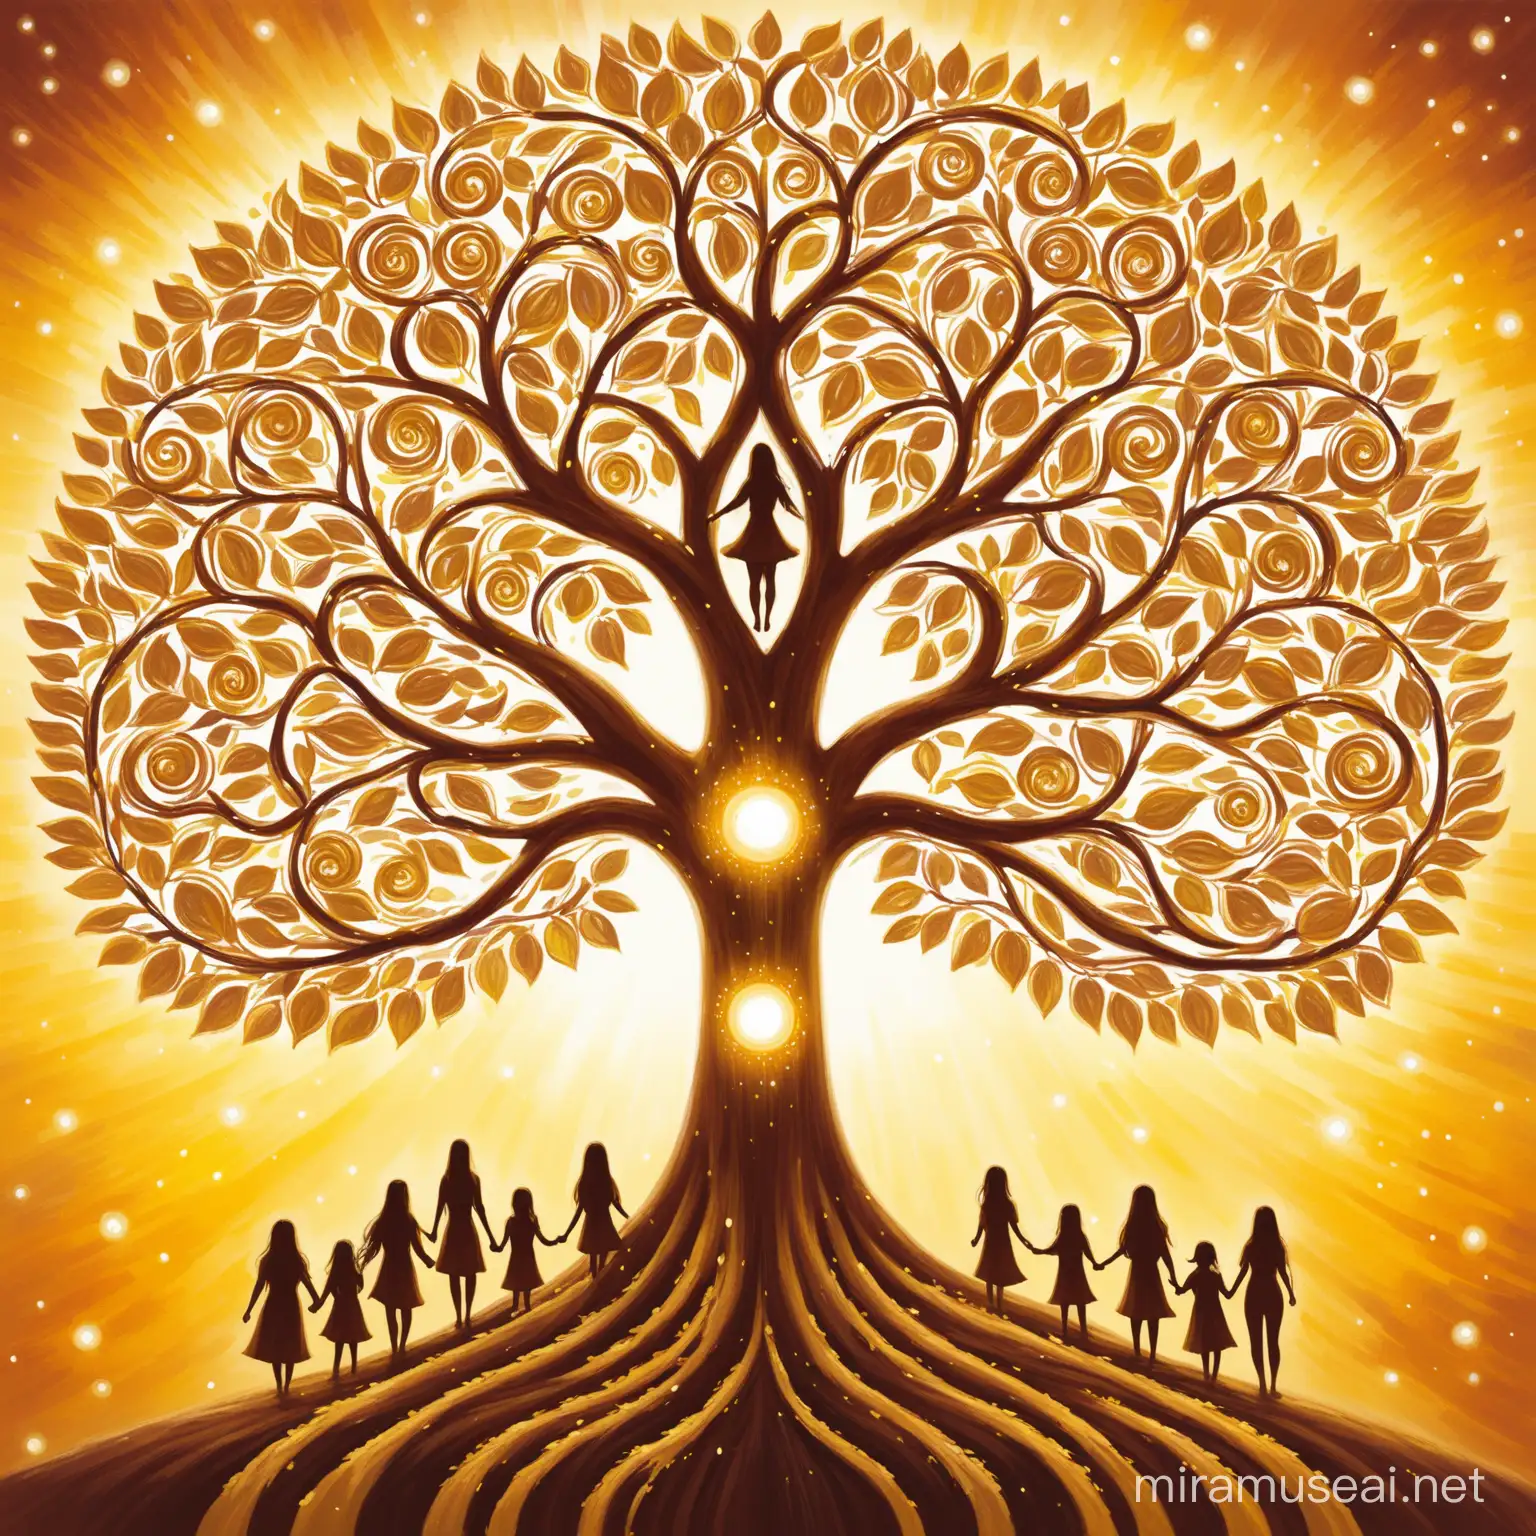 Empowering Women Nurturing the Tree of Life and Family